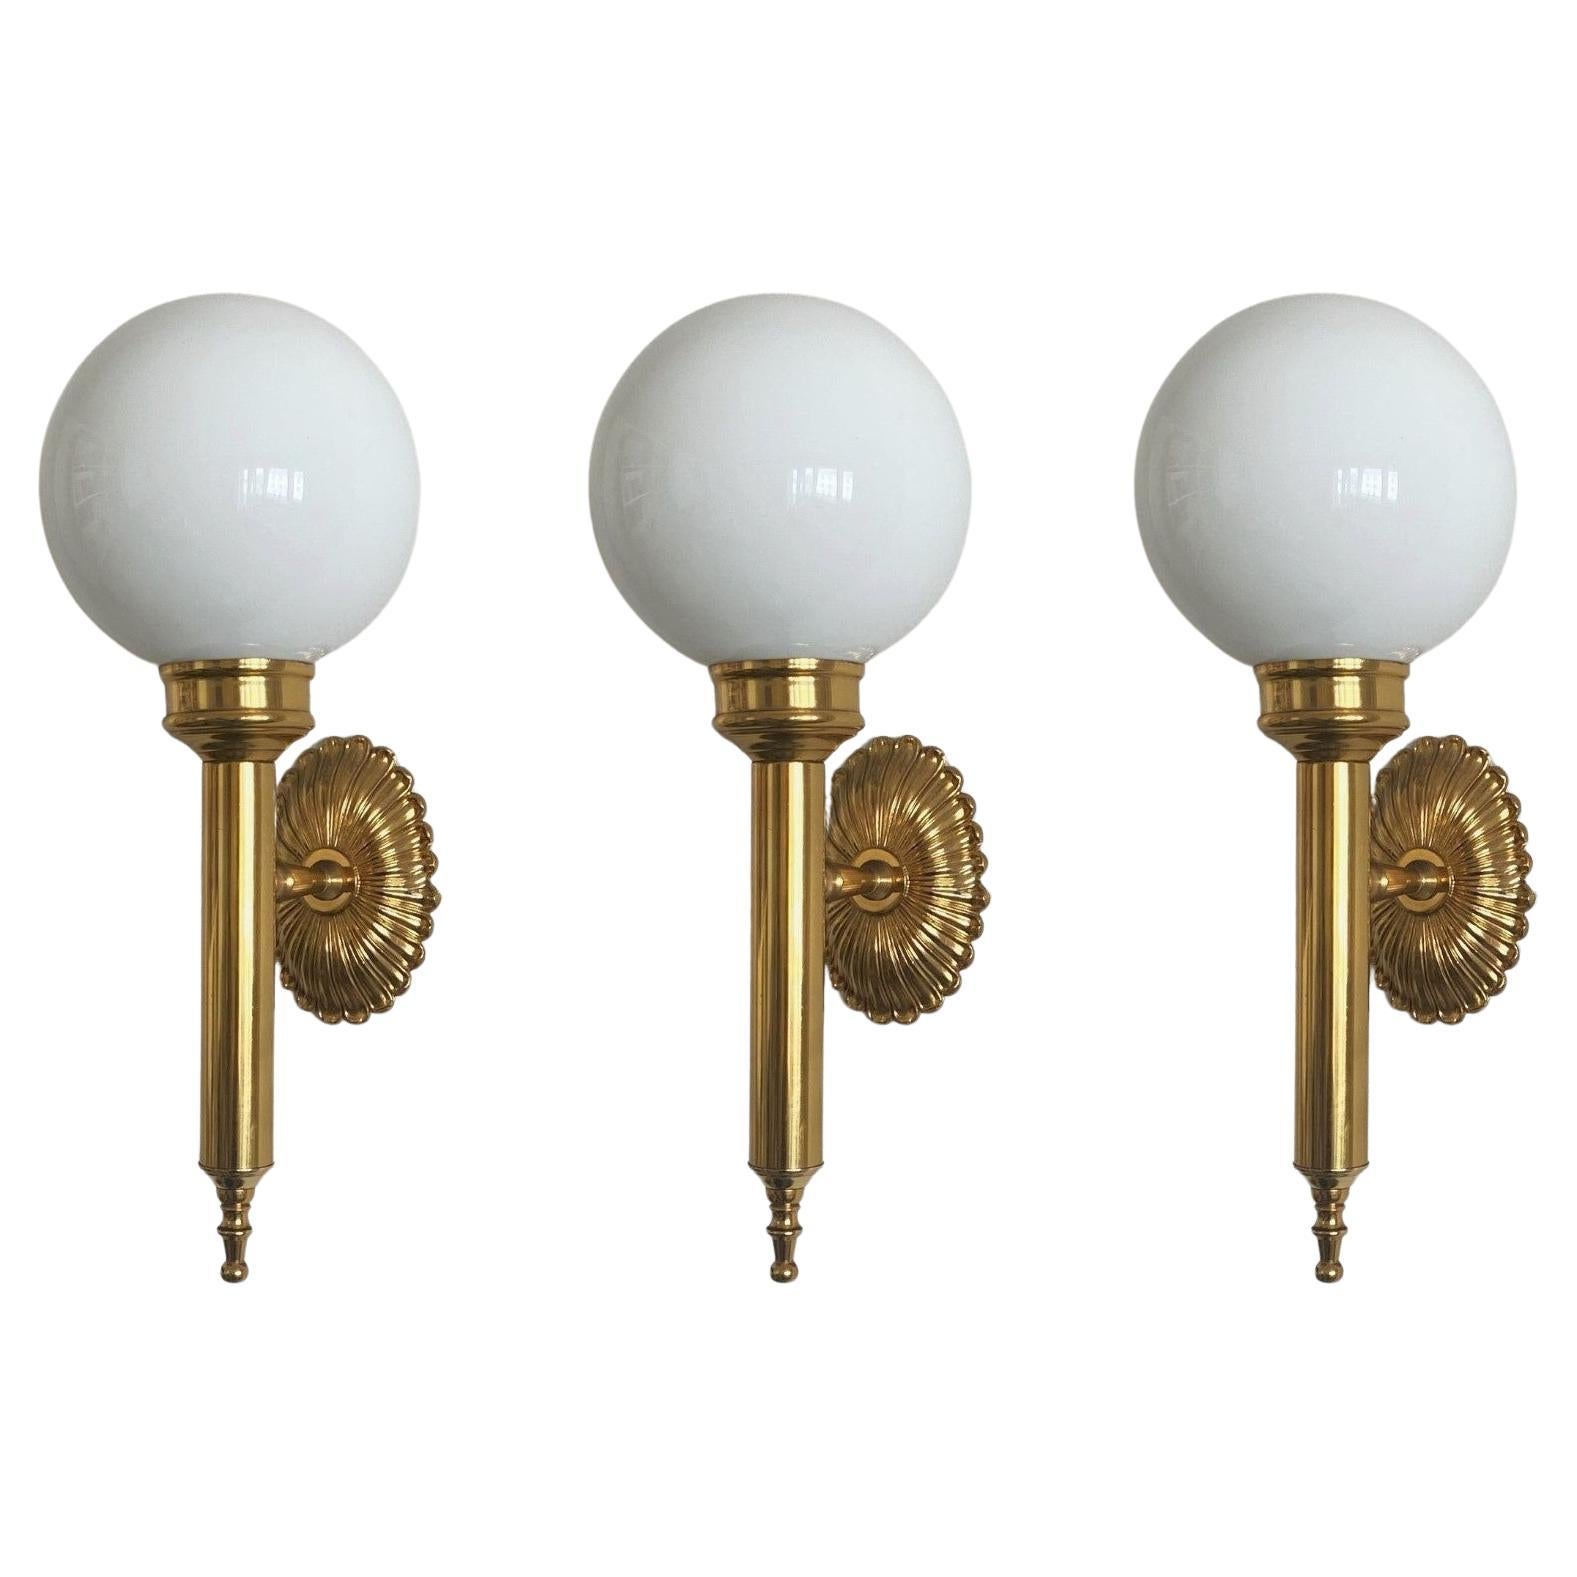 A lovely set of three Art Deco torchiere wall lights, France, 1930s. Elegant design in gilt brass with hand-blown opaline glass ball globes. 
All three pieces in fine vintage condition, glass globes without chips or cracks, aged patina to brass,